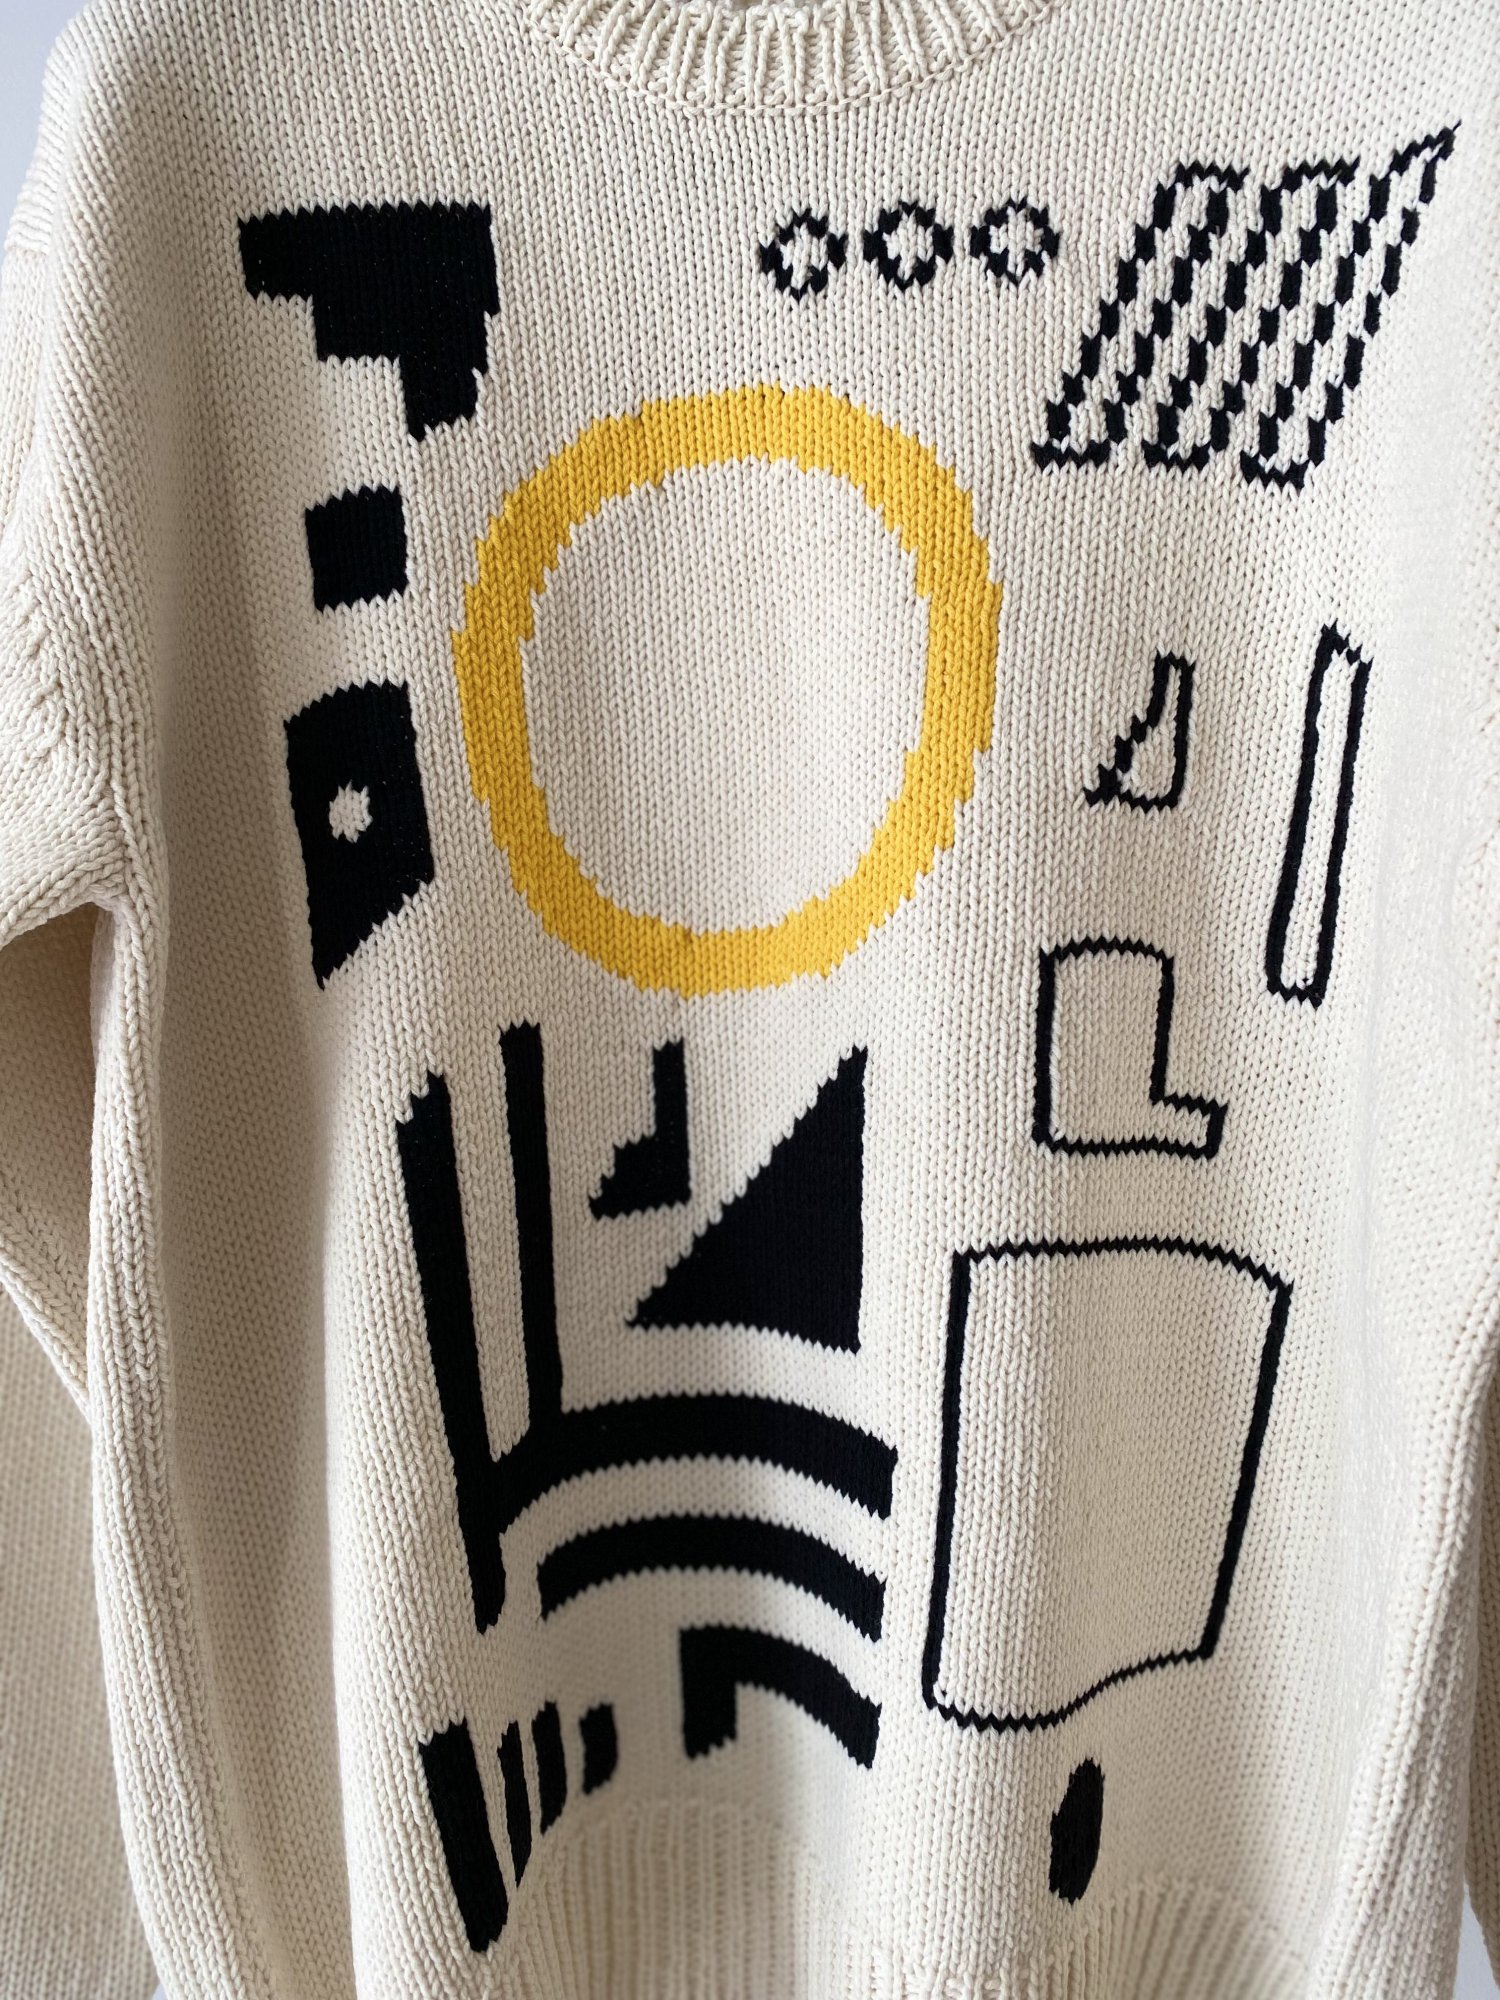 soe<br />Intarsia Sweater Memphis / OFF WHITE<img class='new_mark_img2' src='https://img.shop-pro.jp/img/new/icons14.gif' style='border:none;display:inline;margin:0px;padding:0px;width:auto;' />